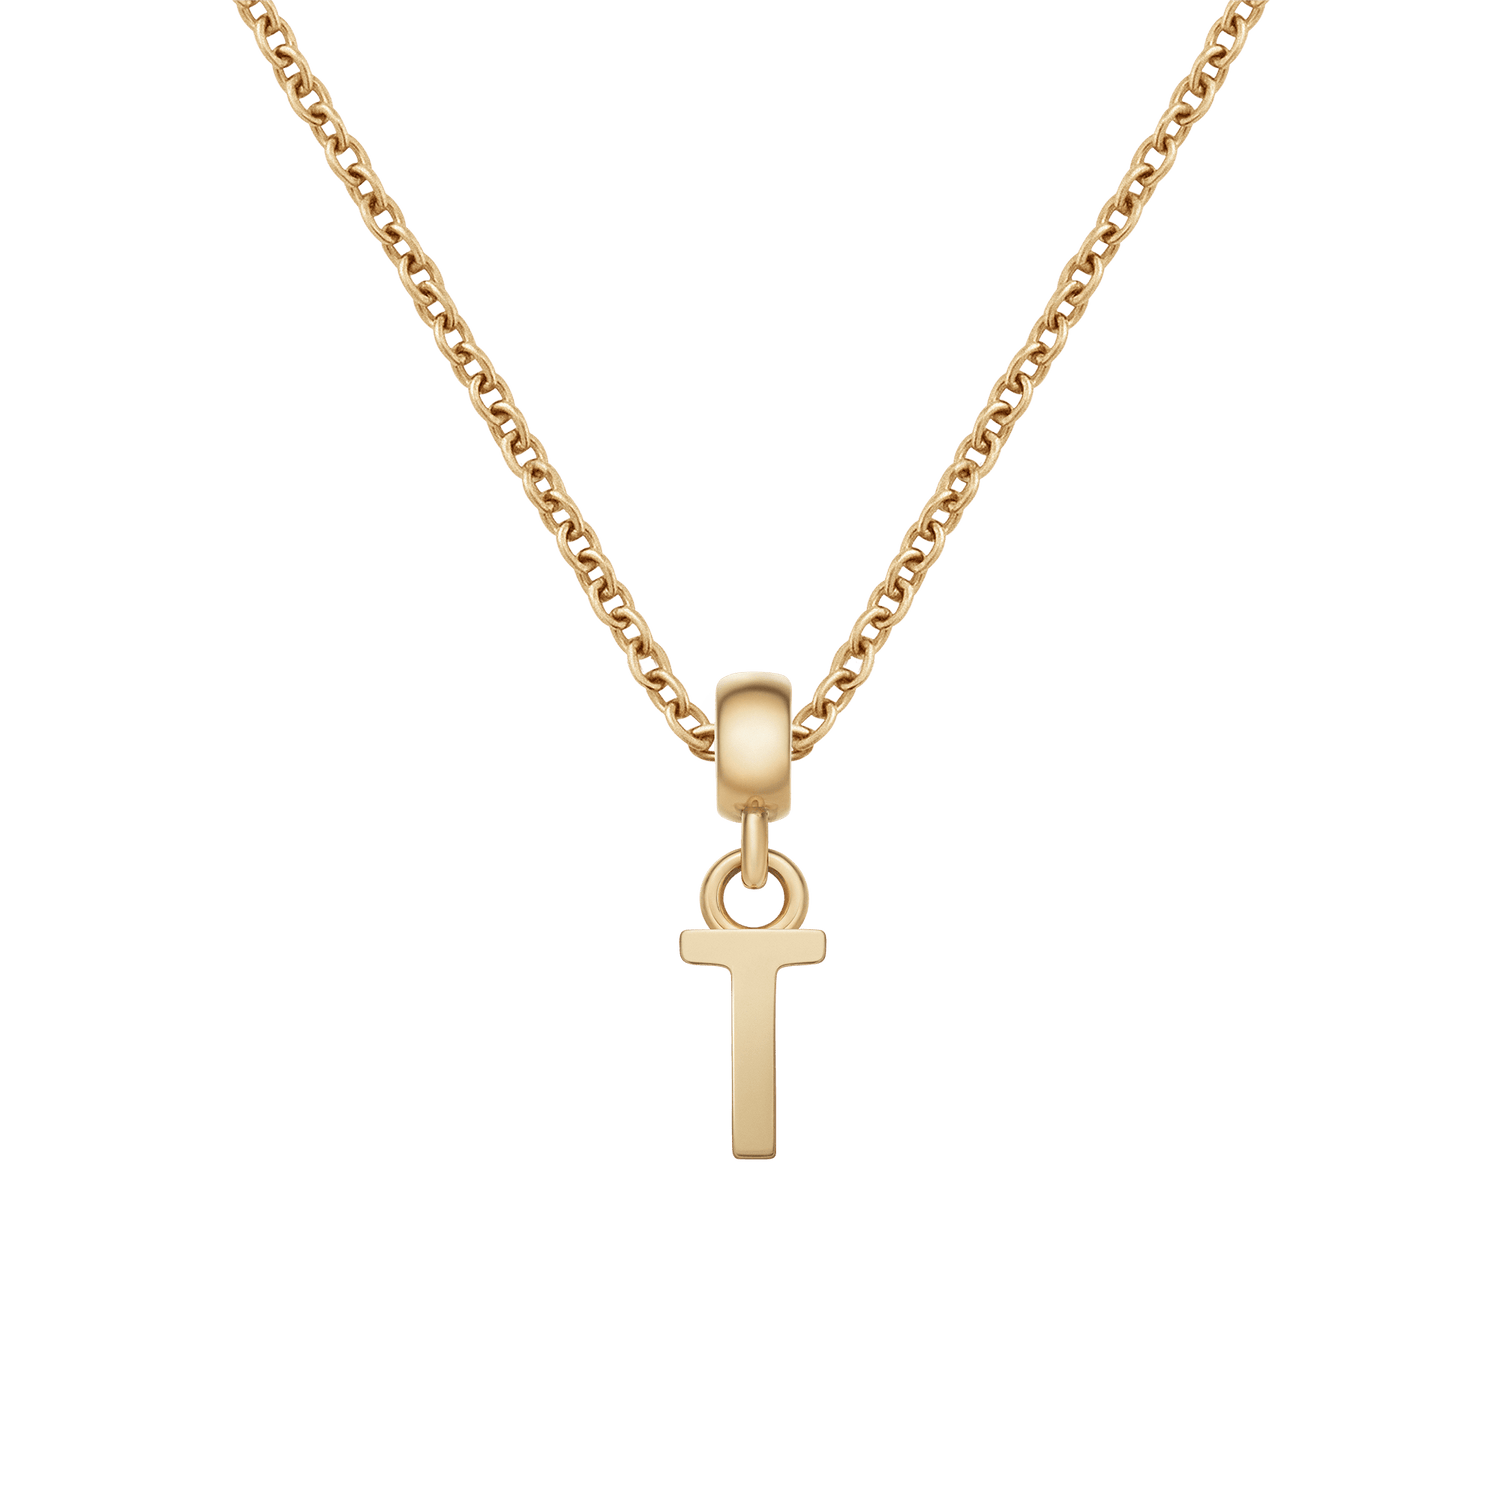 Your Choice of Letter Charm on Chain necklace